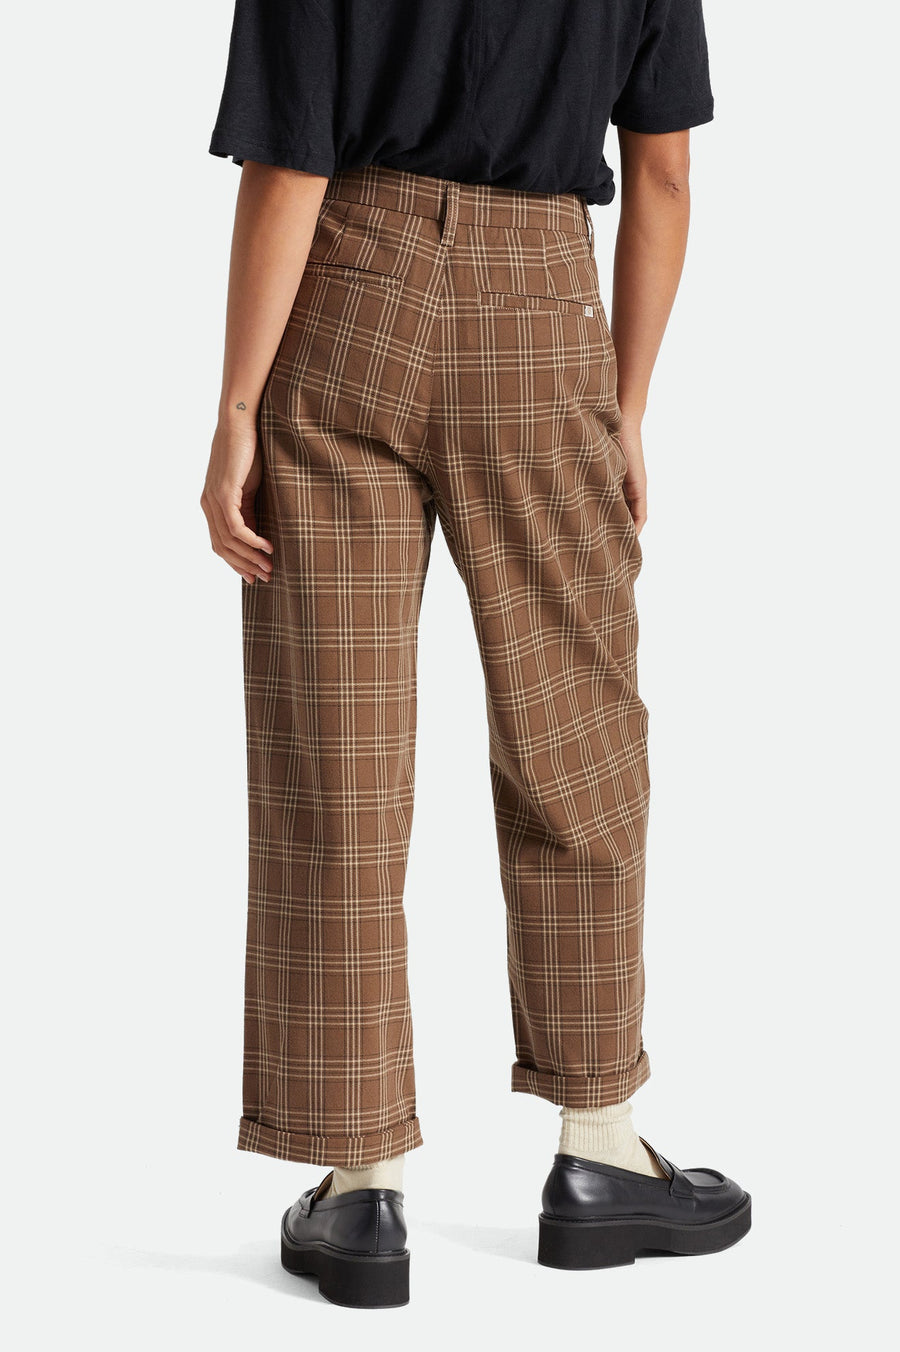 Victory Trouser Pant - Washed Brown/Black